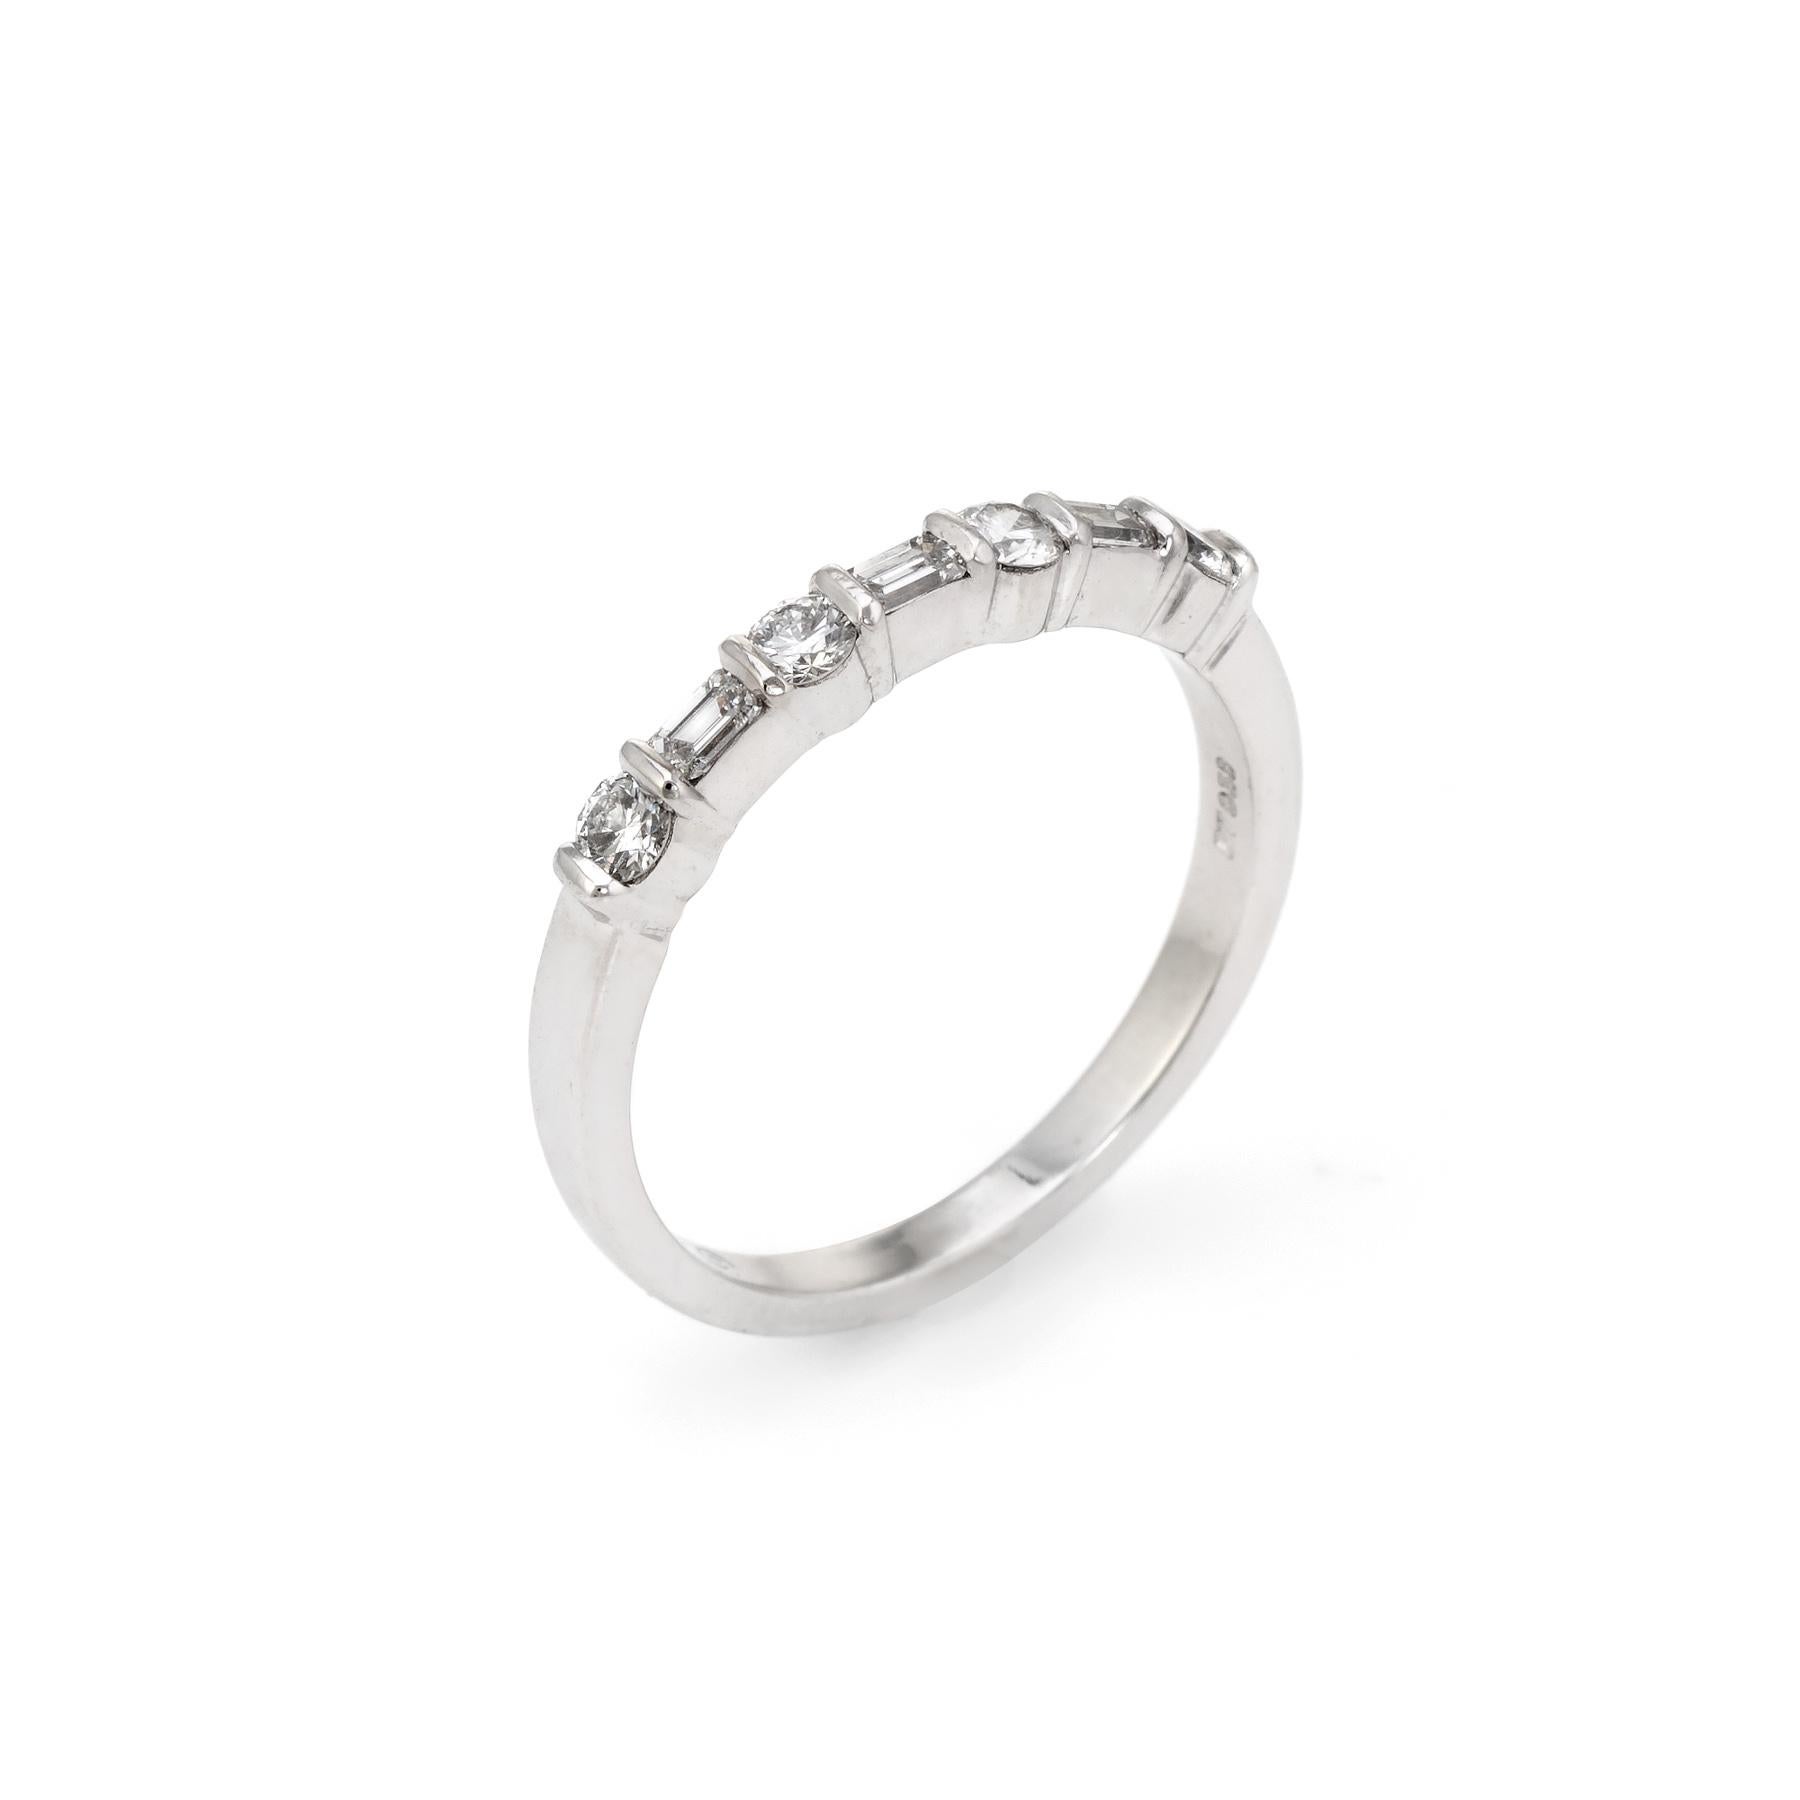 Pre-owned Tiffany & Co mixed cut diamond band crafted in platinum.  

Four round brilliant cut diamonds are estimated at 0.08 carats, with three emerald cut diamonds estimated at 0.05 carats each. The total diamond weight is estimated at 0.47 carats